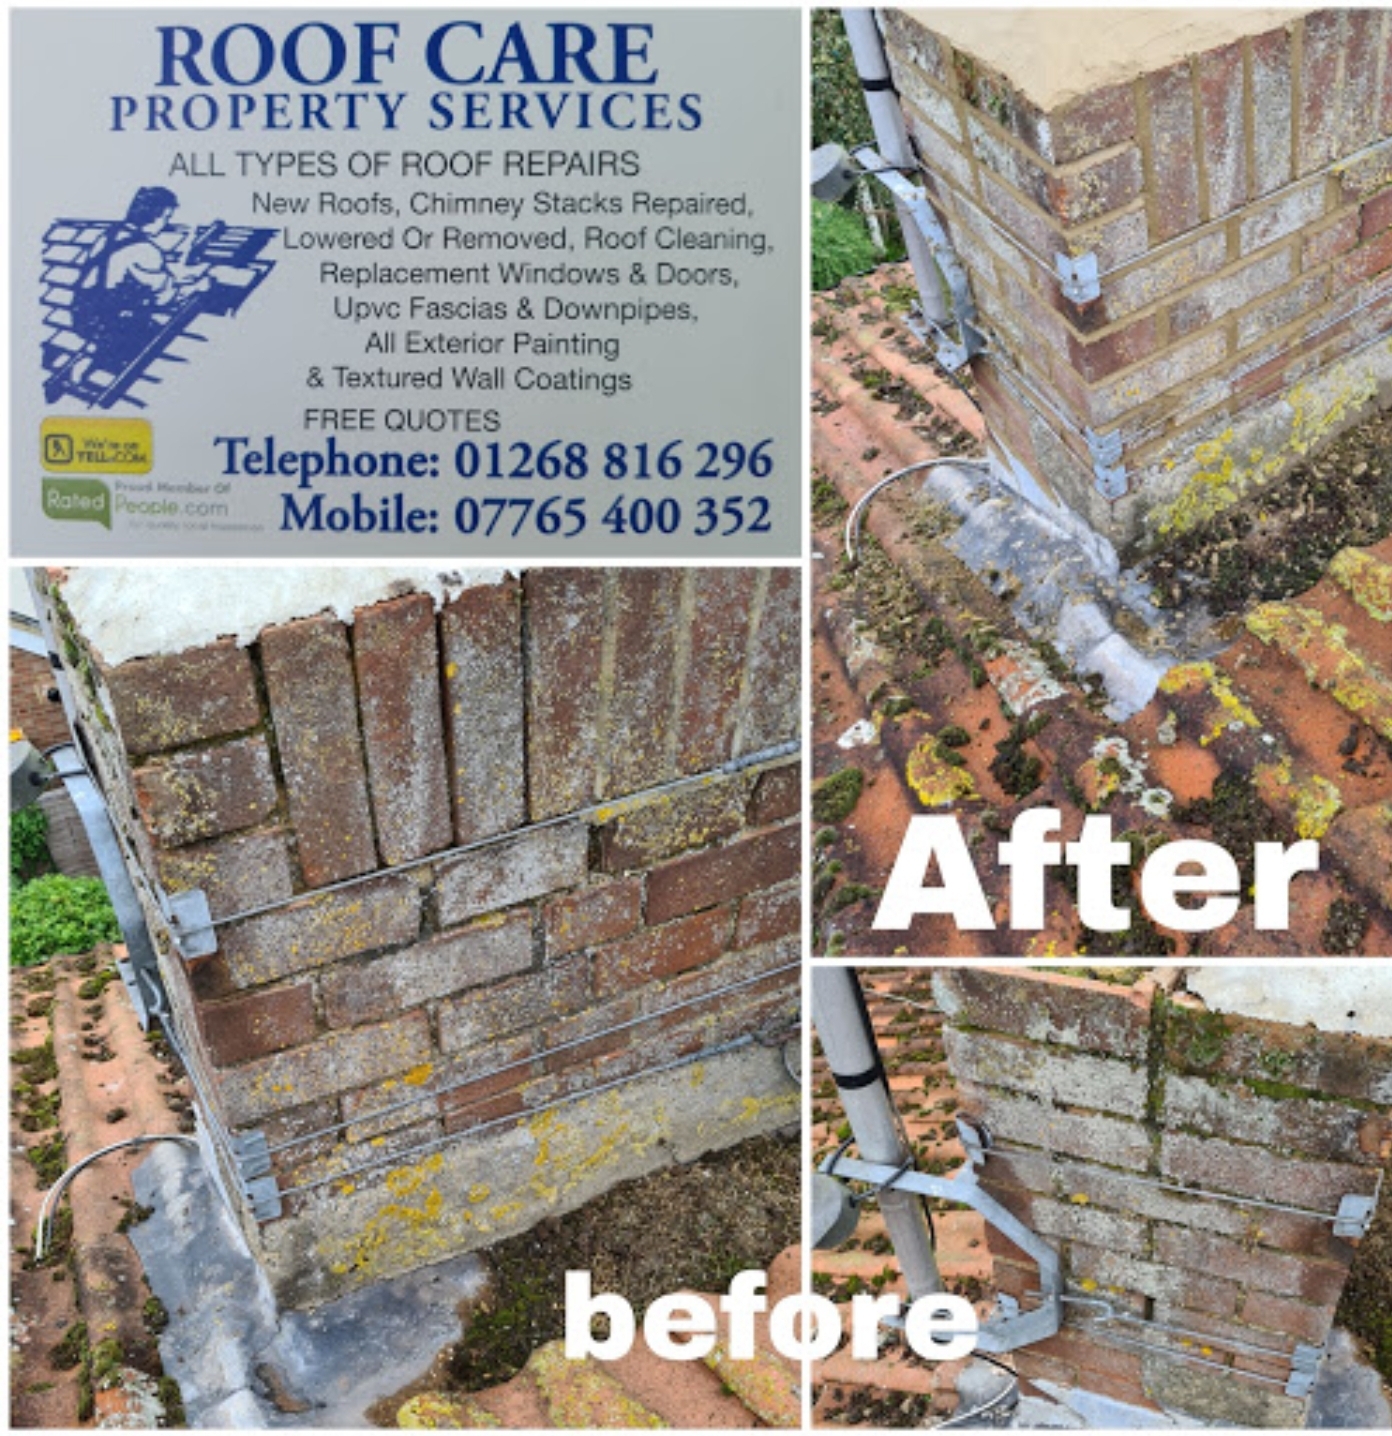 Logo of Roof care property services Roofing Services In Wickford, Essex